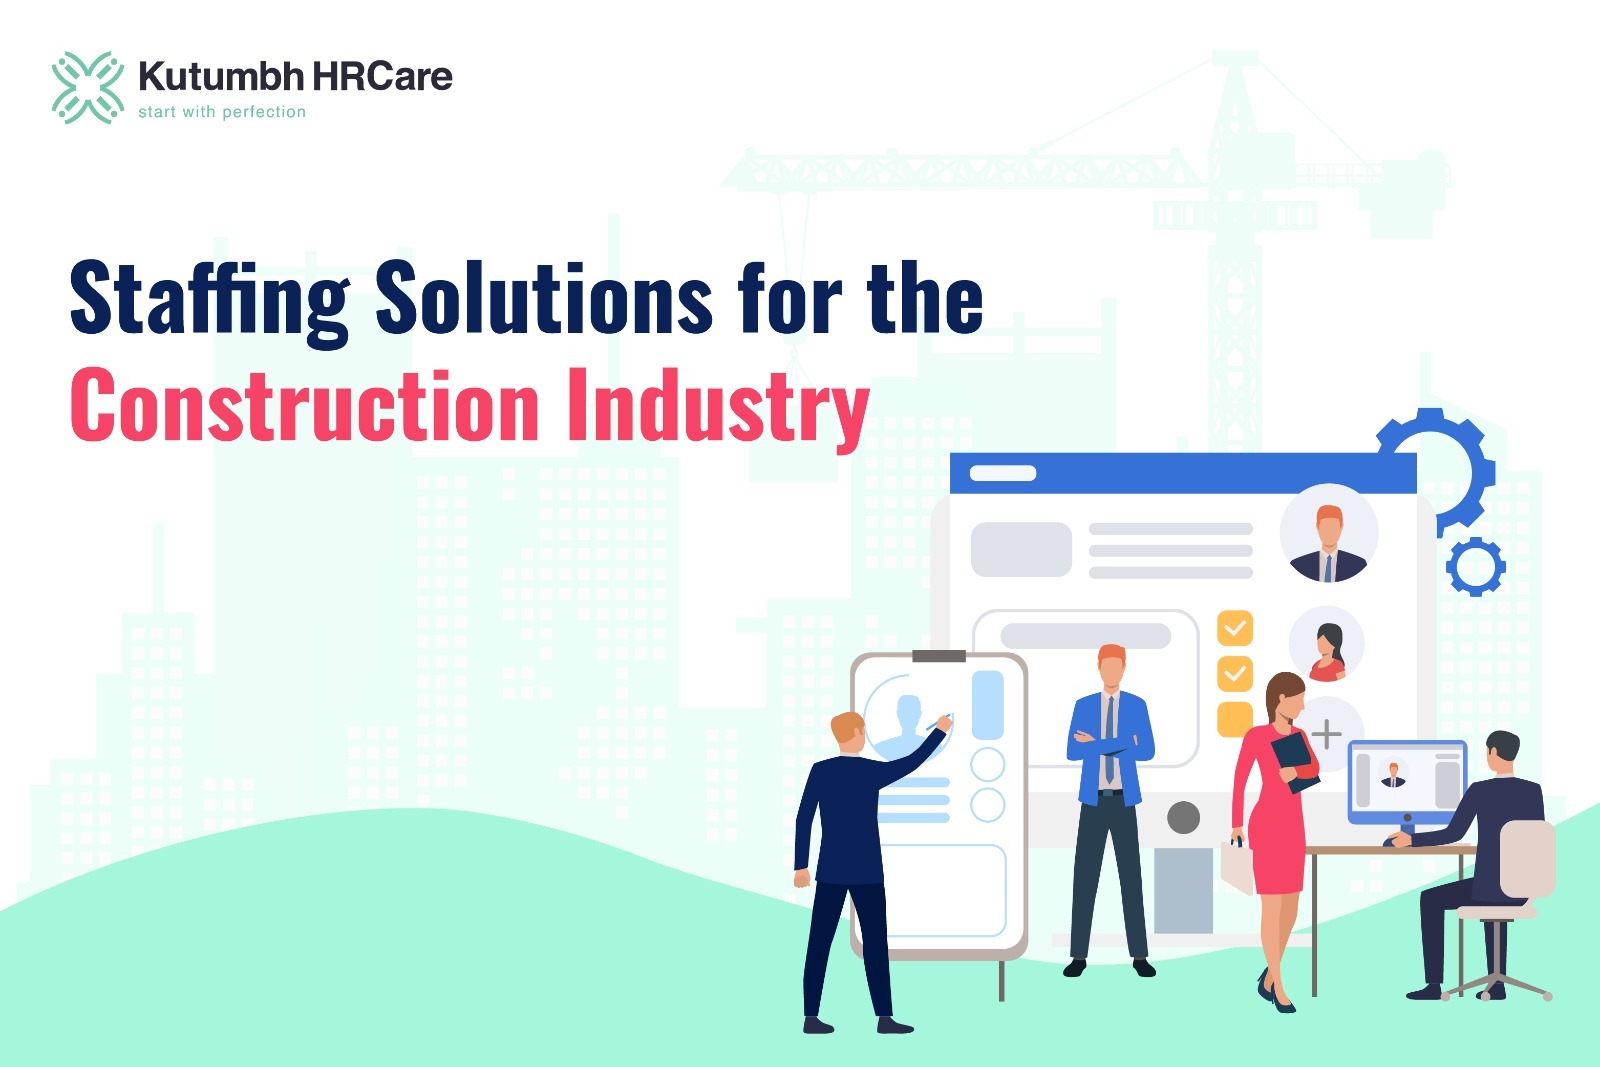 Staffing Solutions for the Construction Industry